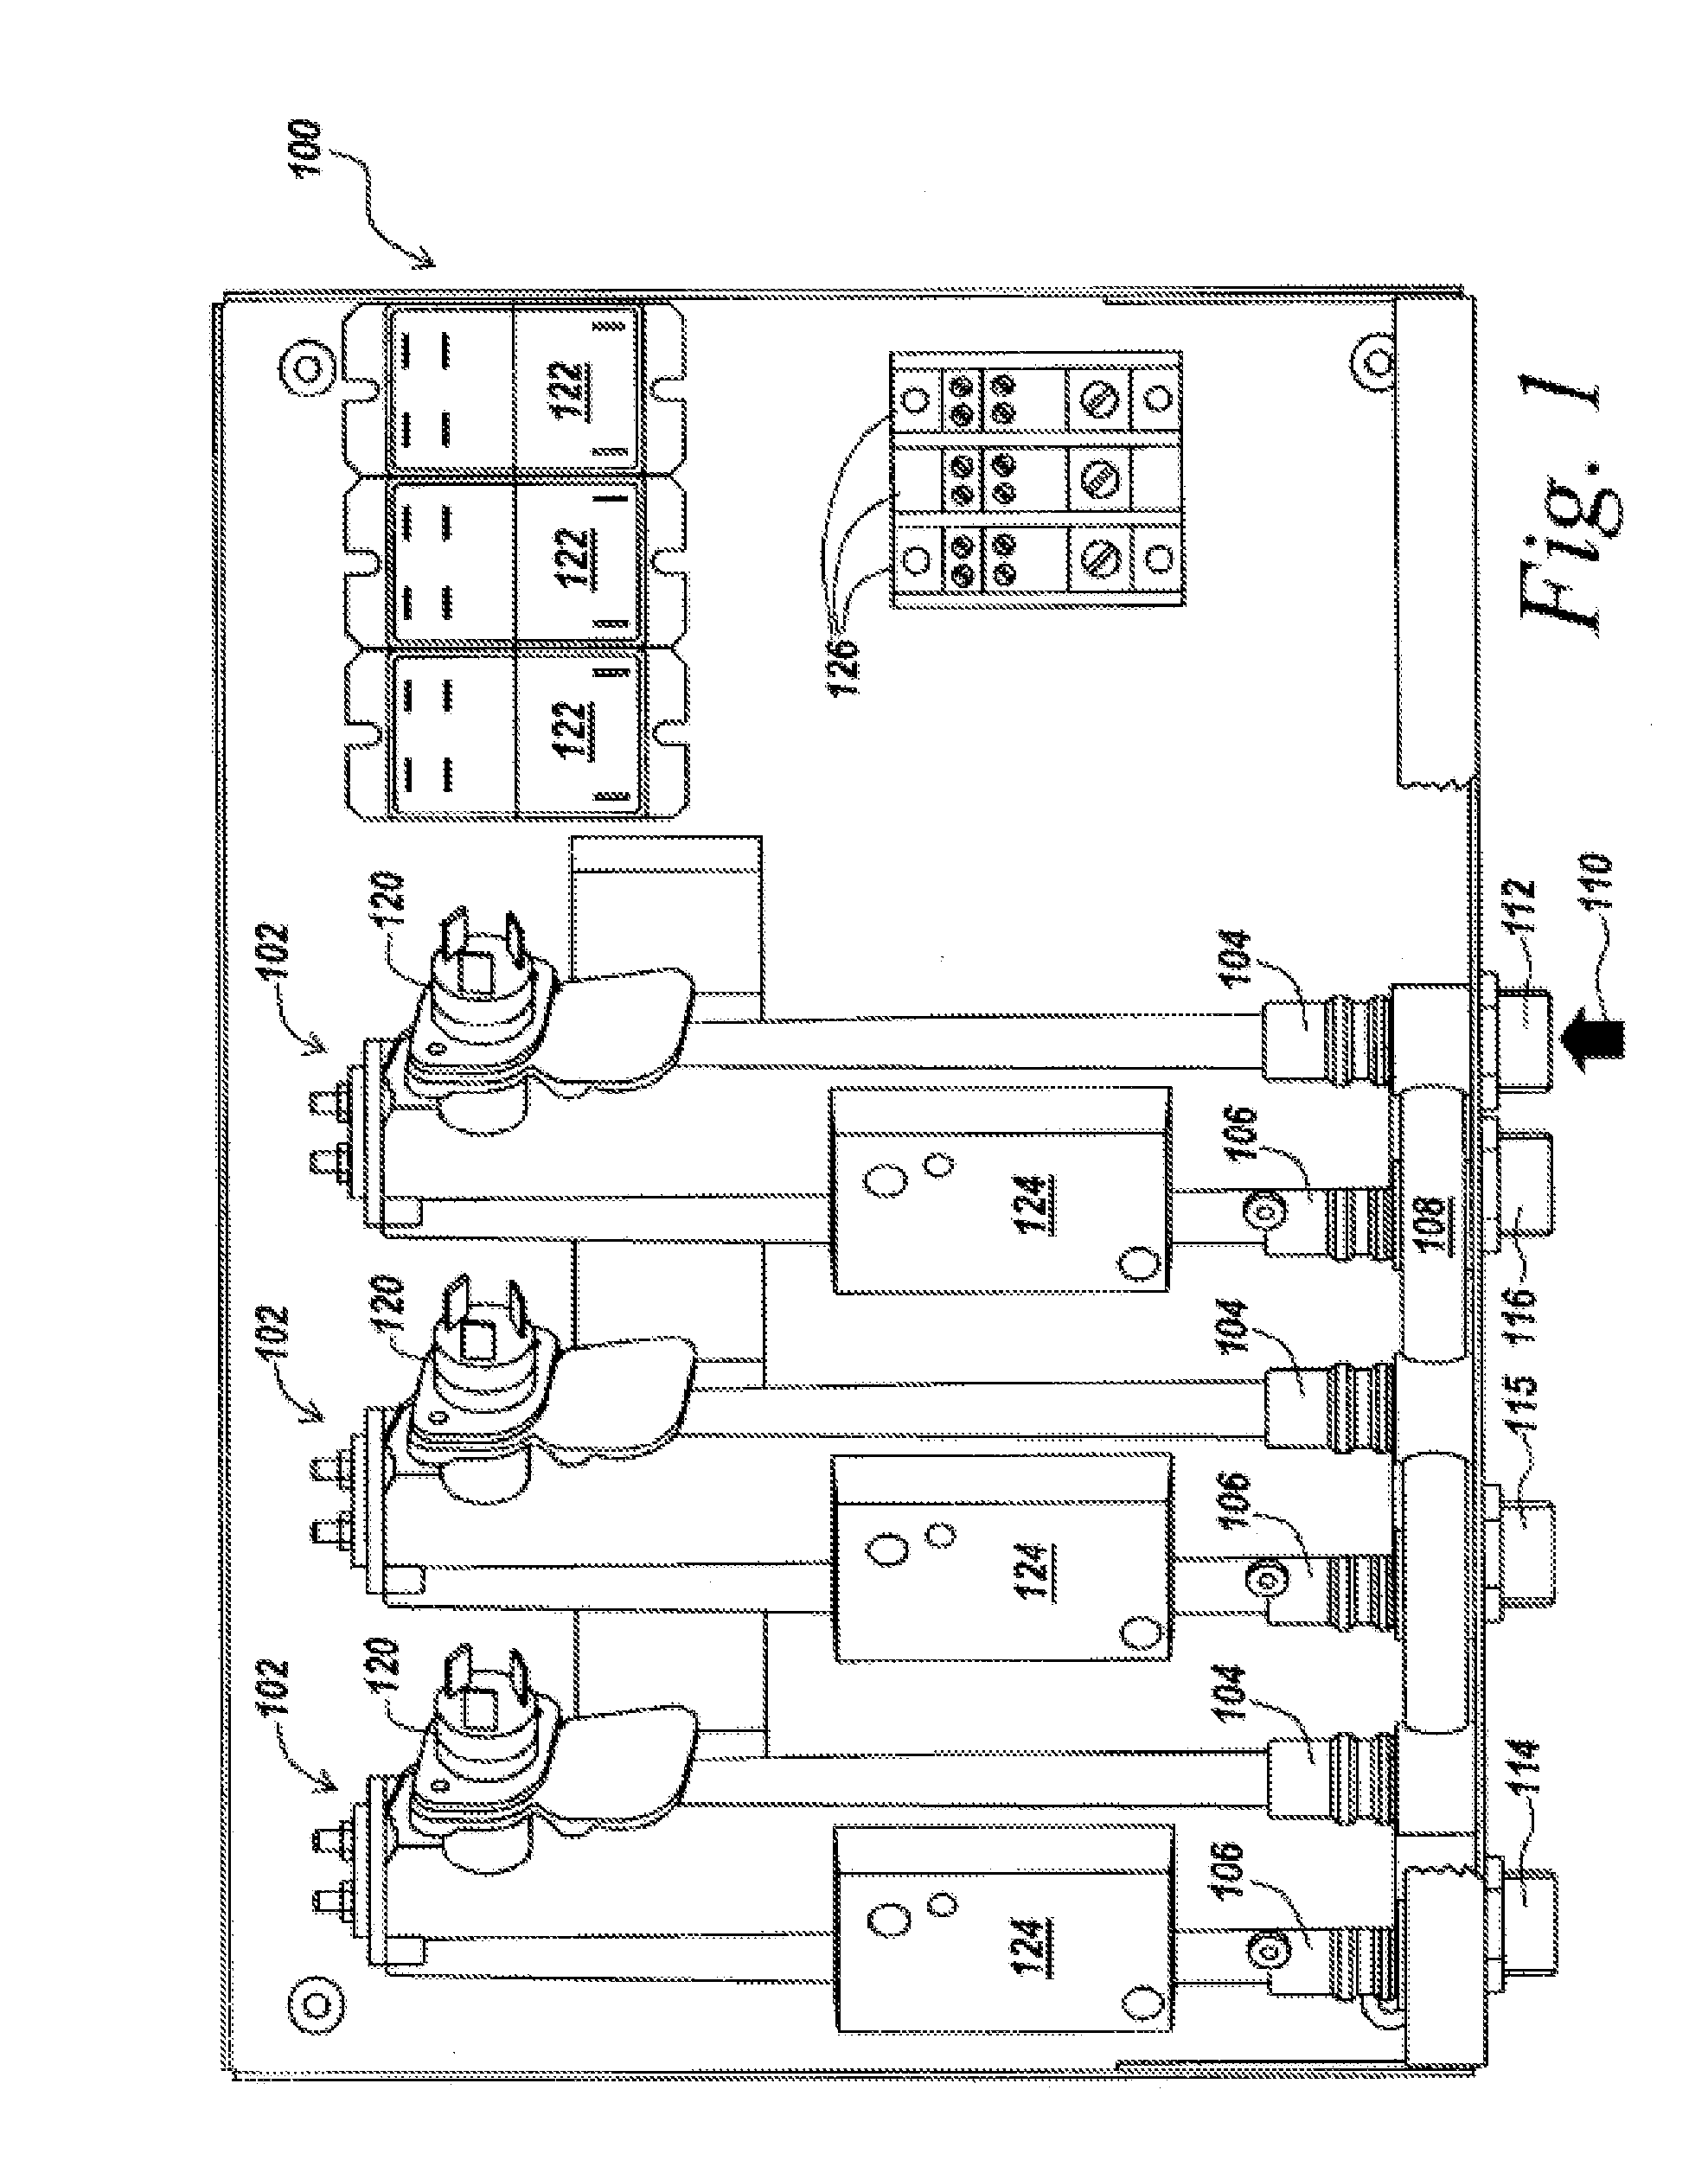 Tankless liquid heater using a thermostatic mixing valve